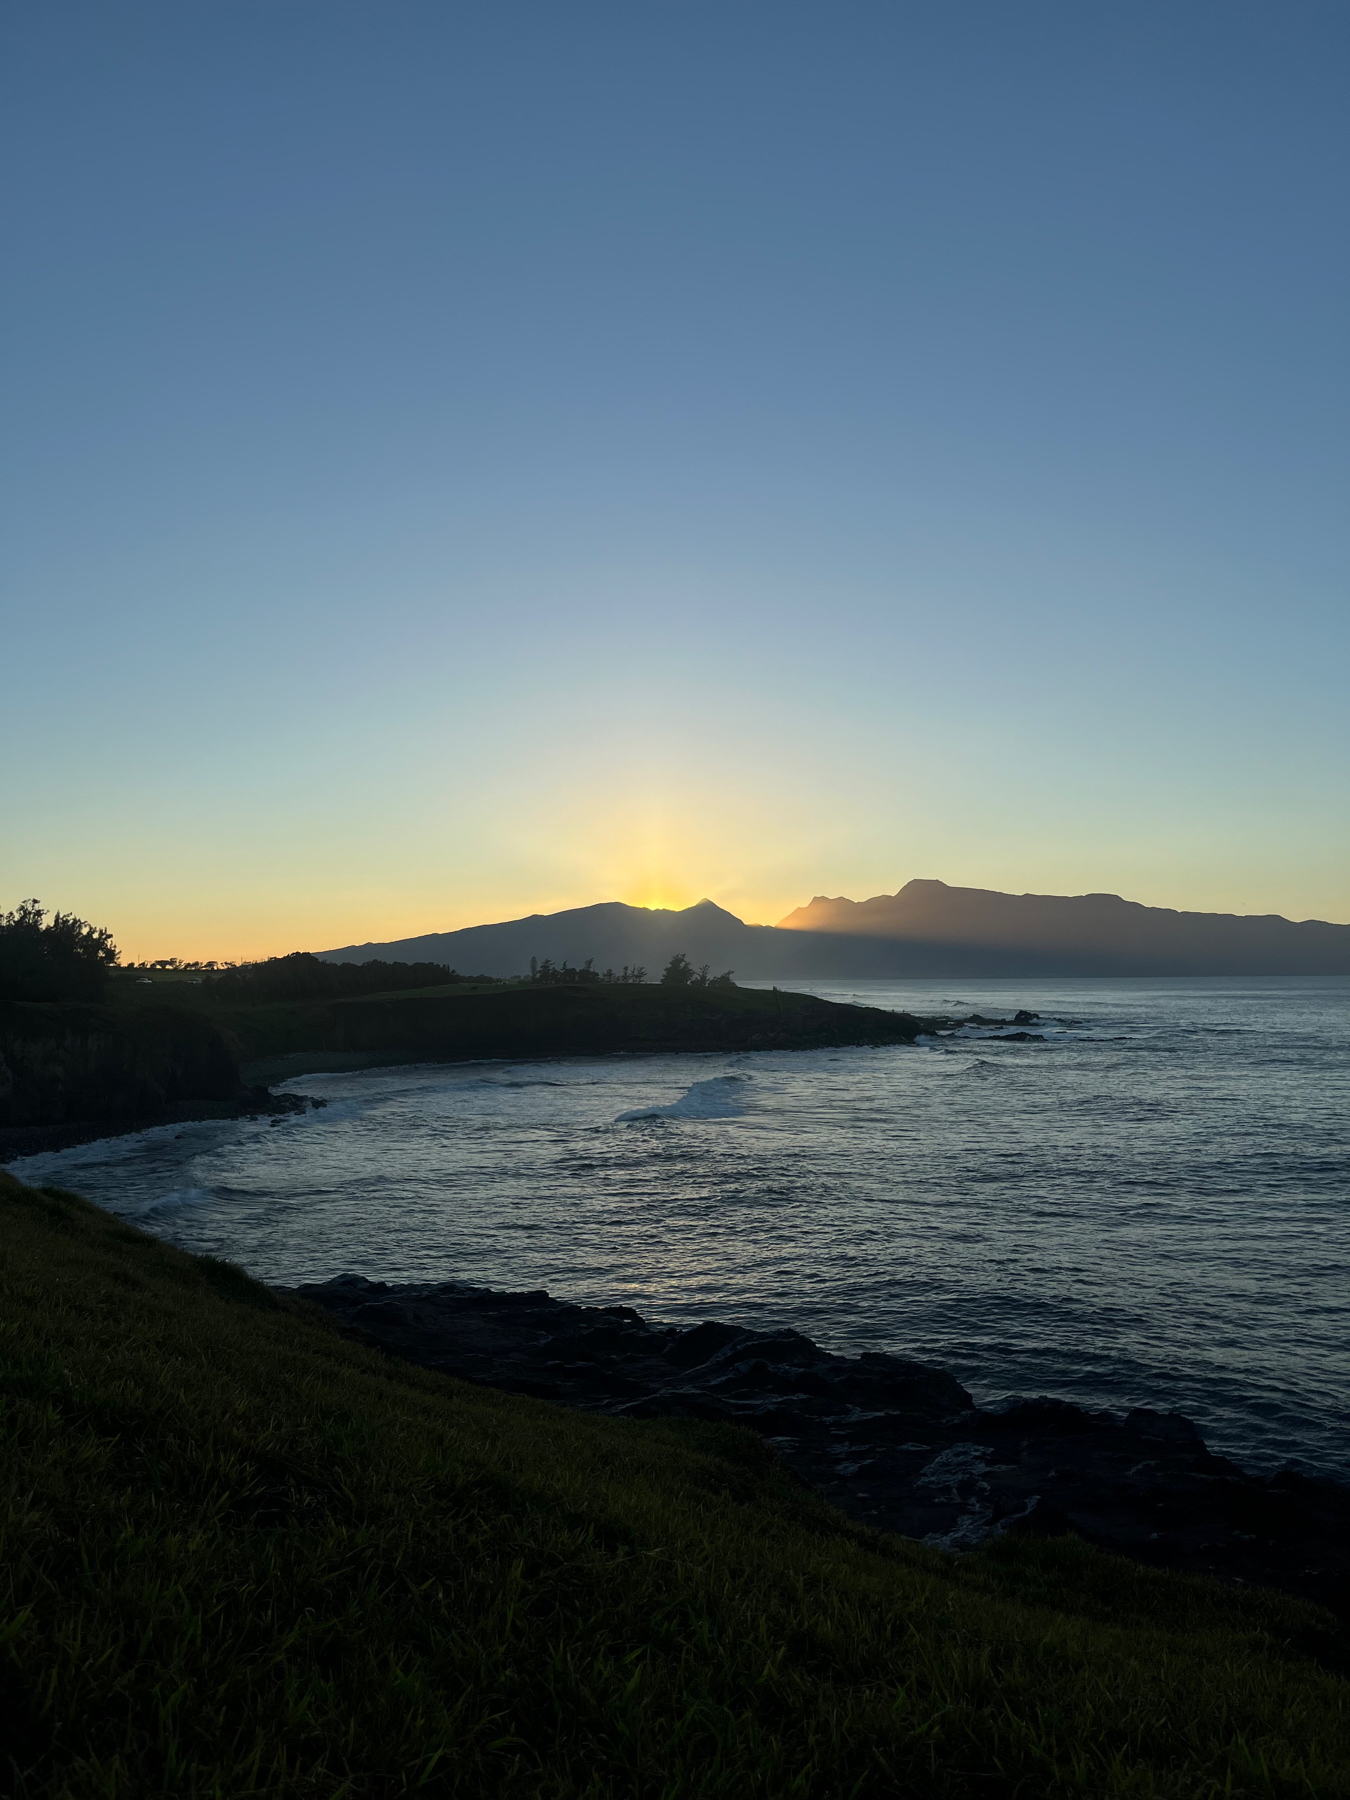 Sunset over the ocean with the sun peeking through the silhouette of the West Maui mountains, with a grassy foreground and a rocky shoreline.